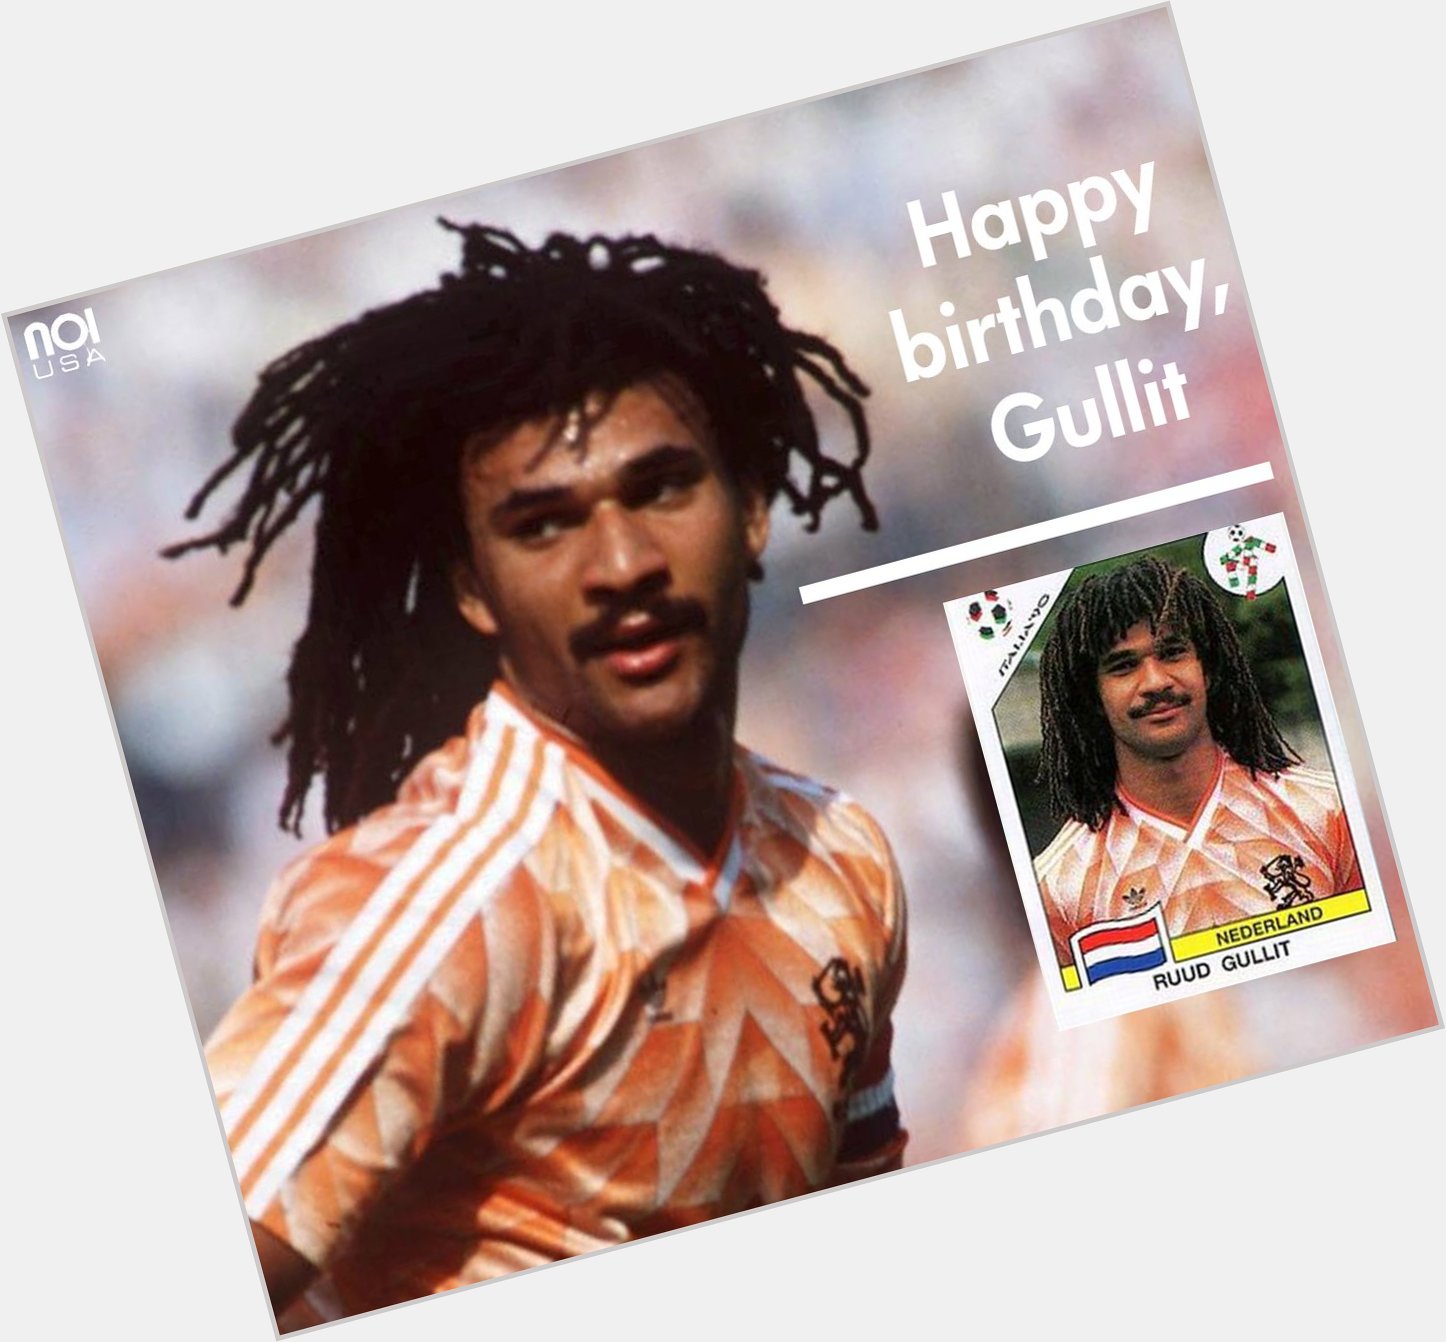 Happy birthday to one legend!!! RUUD GULLIT!!! Do you think he was a great player??? 